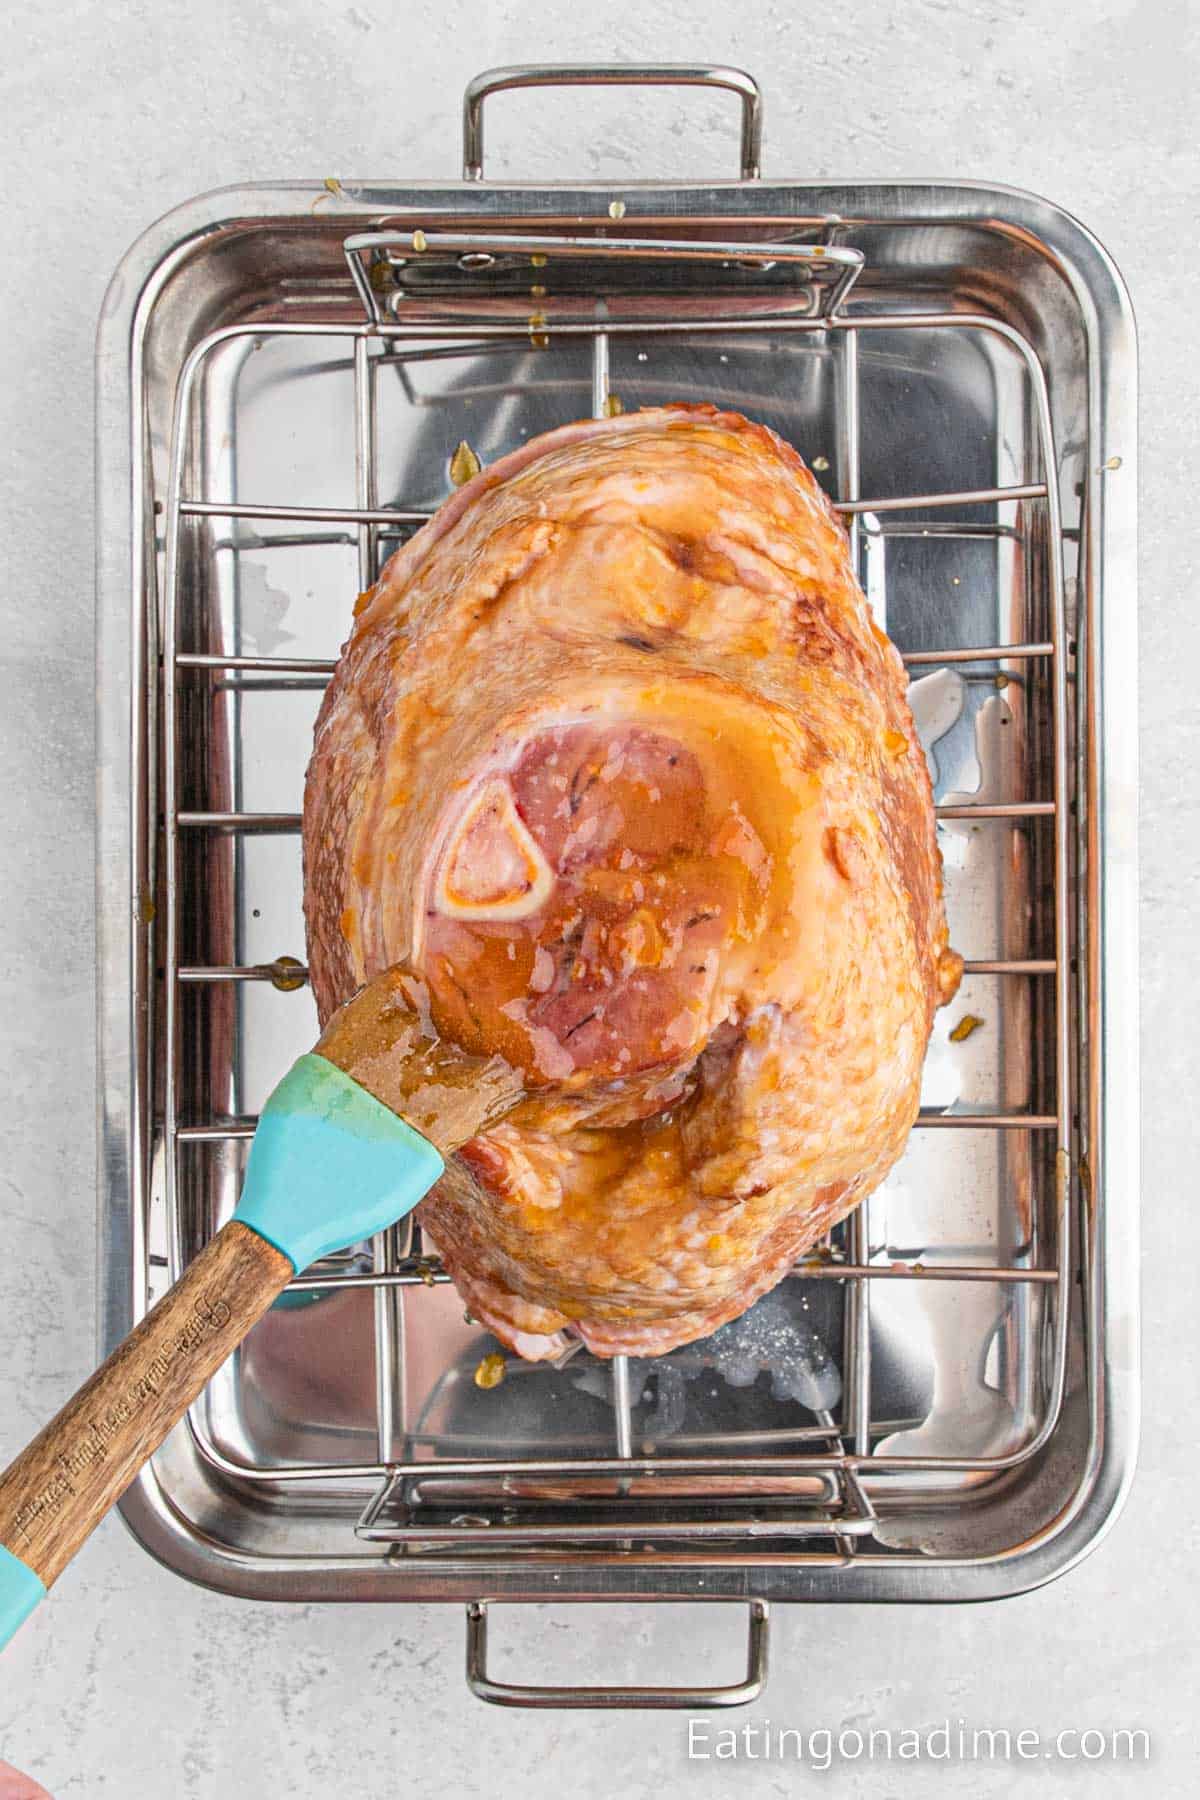 Basting ham with brush while in the roasting pan